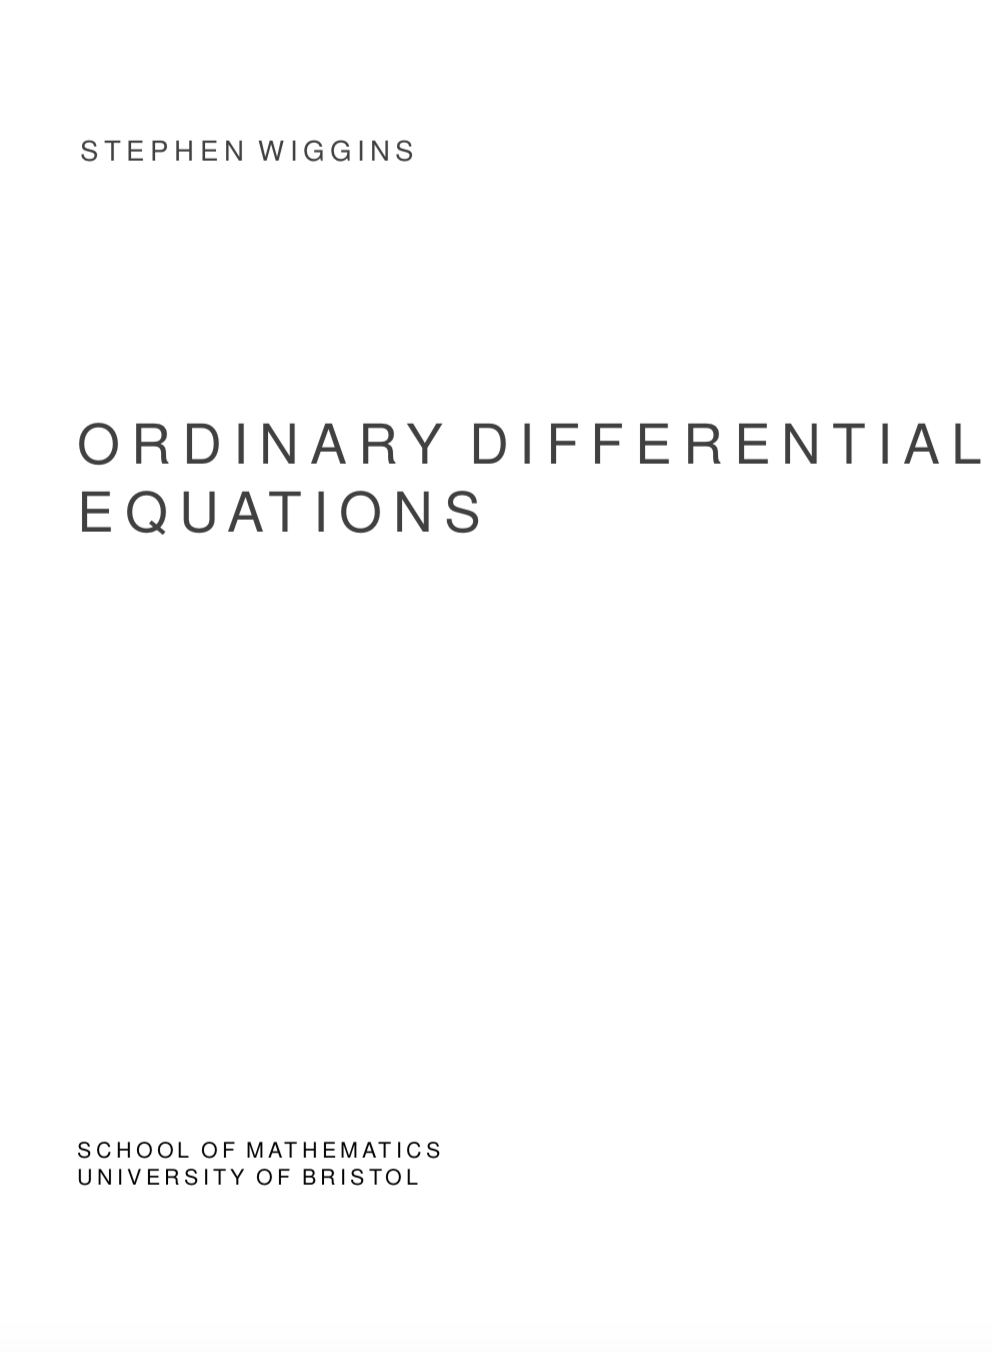 book cover - Ordinary differential equations